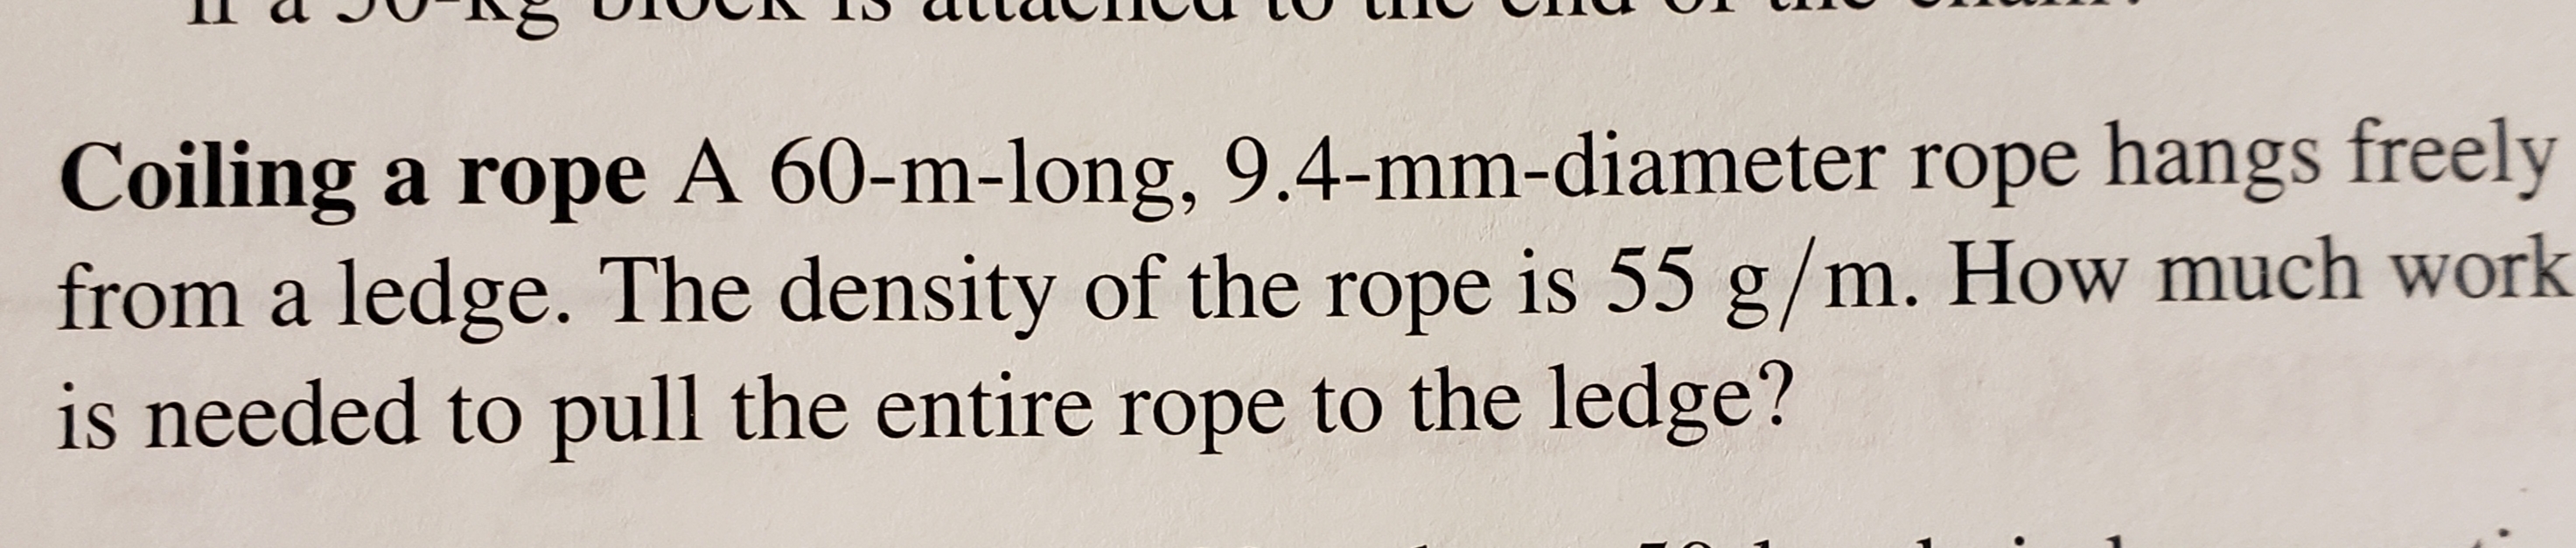 Coiling a rope A 60-m-long, 9.4-mm-diameter rope hangs freely
from a ledge. The density of the rope is 55 g/m. How much work
is needed to pull the entire rope to the ledge?
